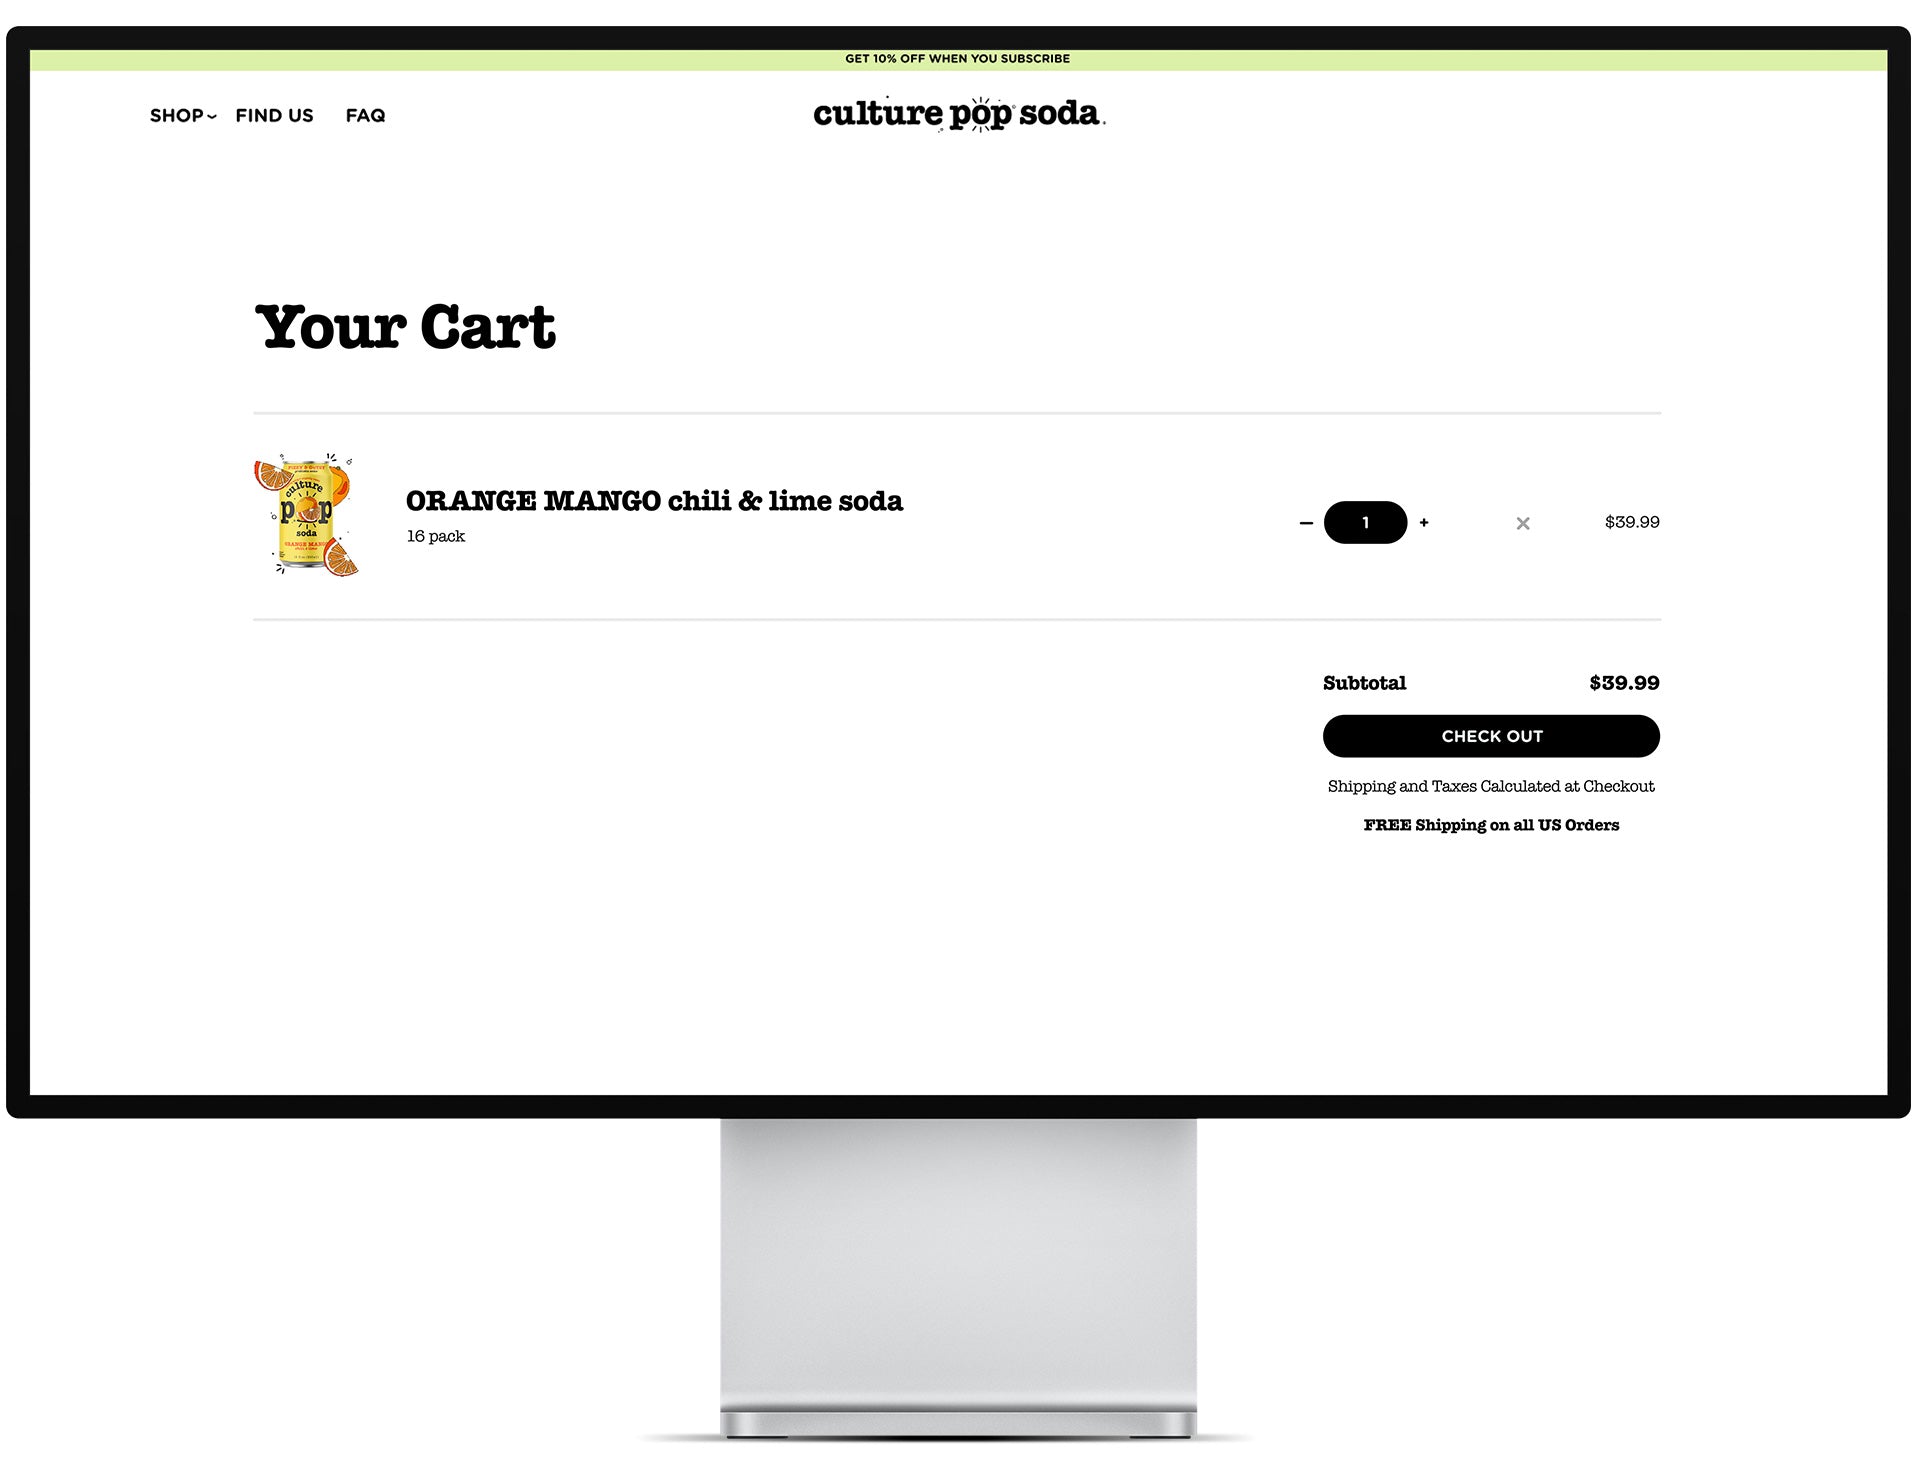 Culture Pop Soda Shopify Cart Page Design and Development